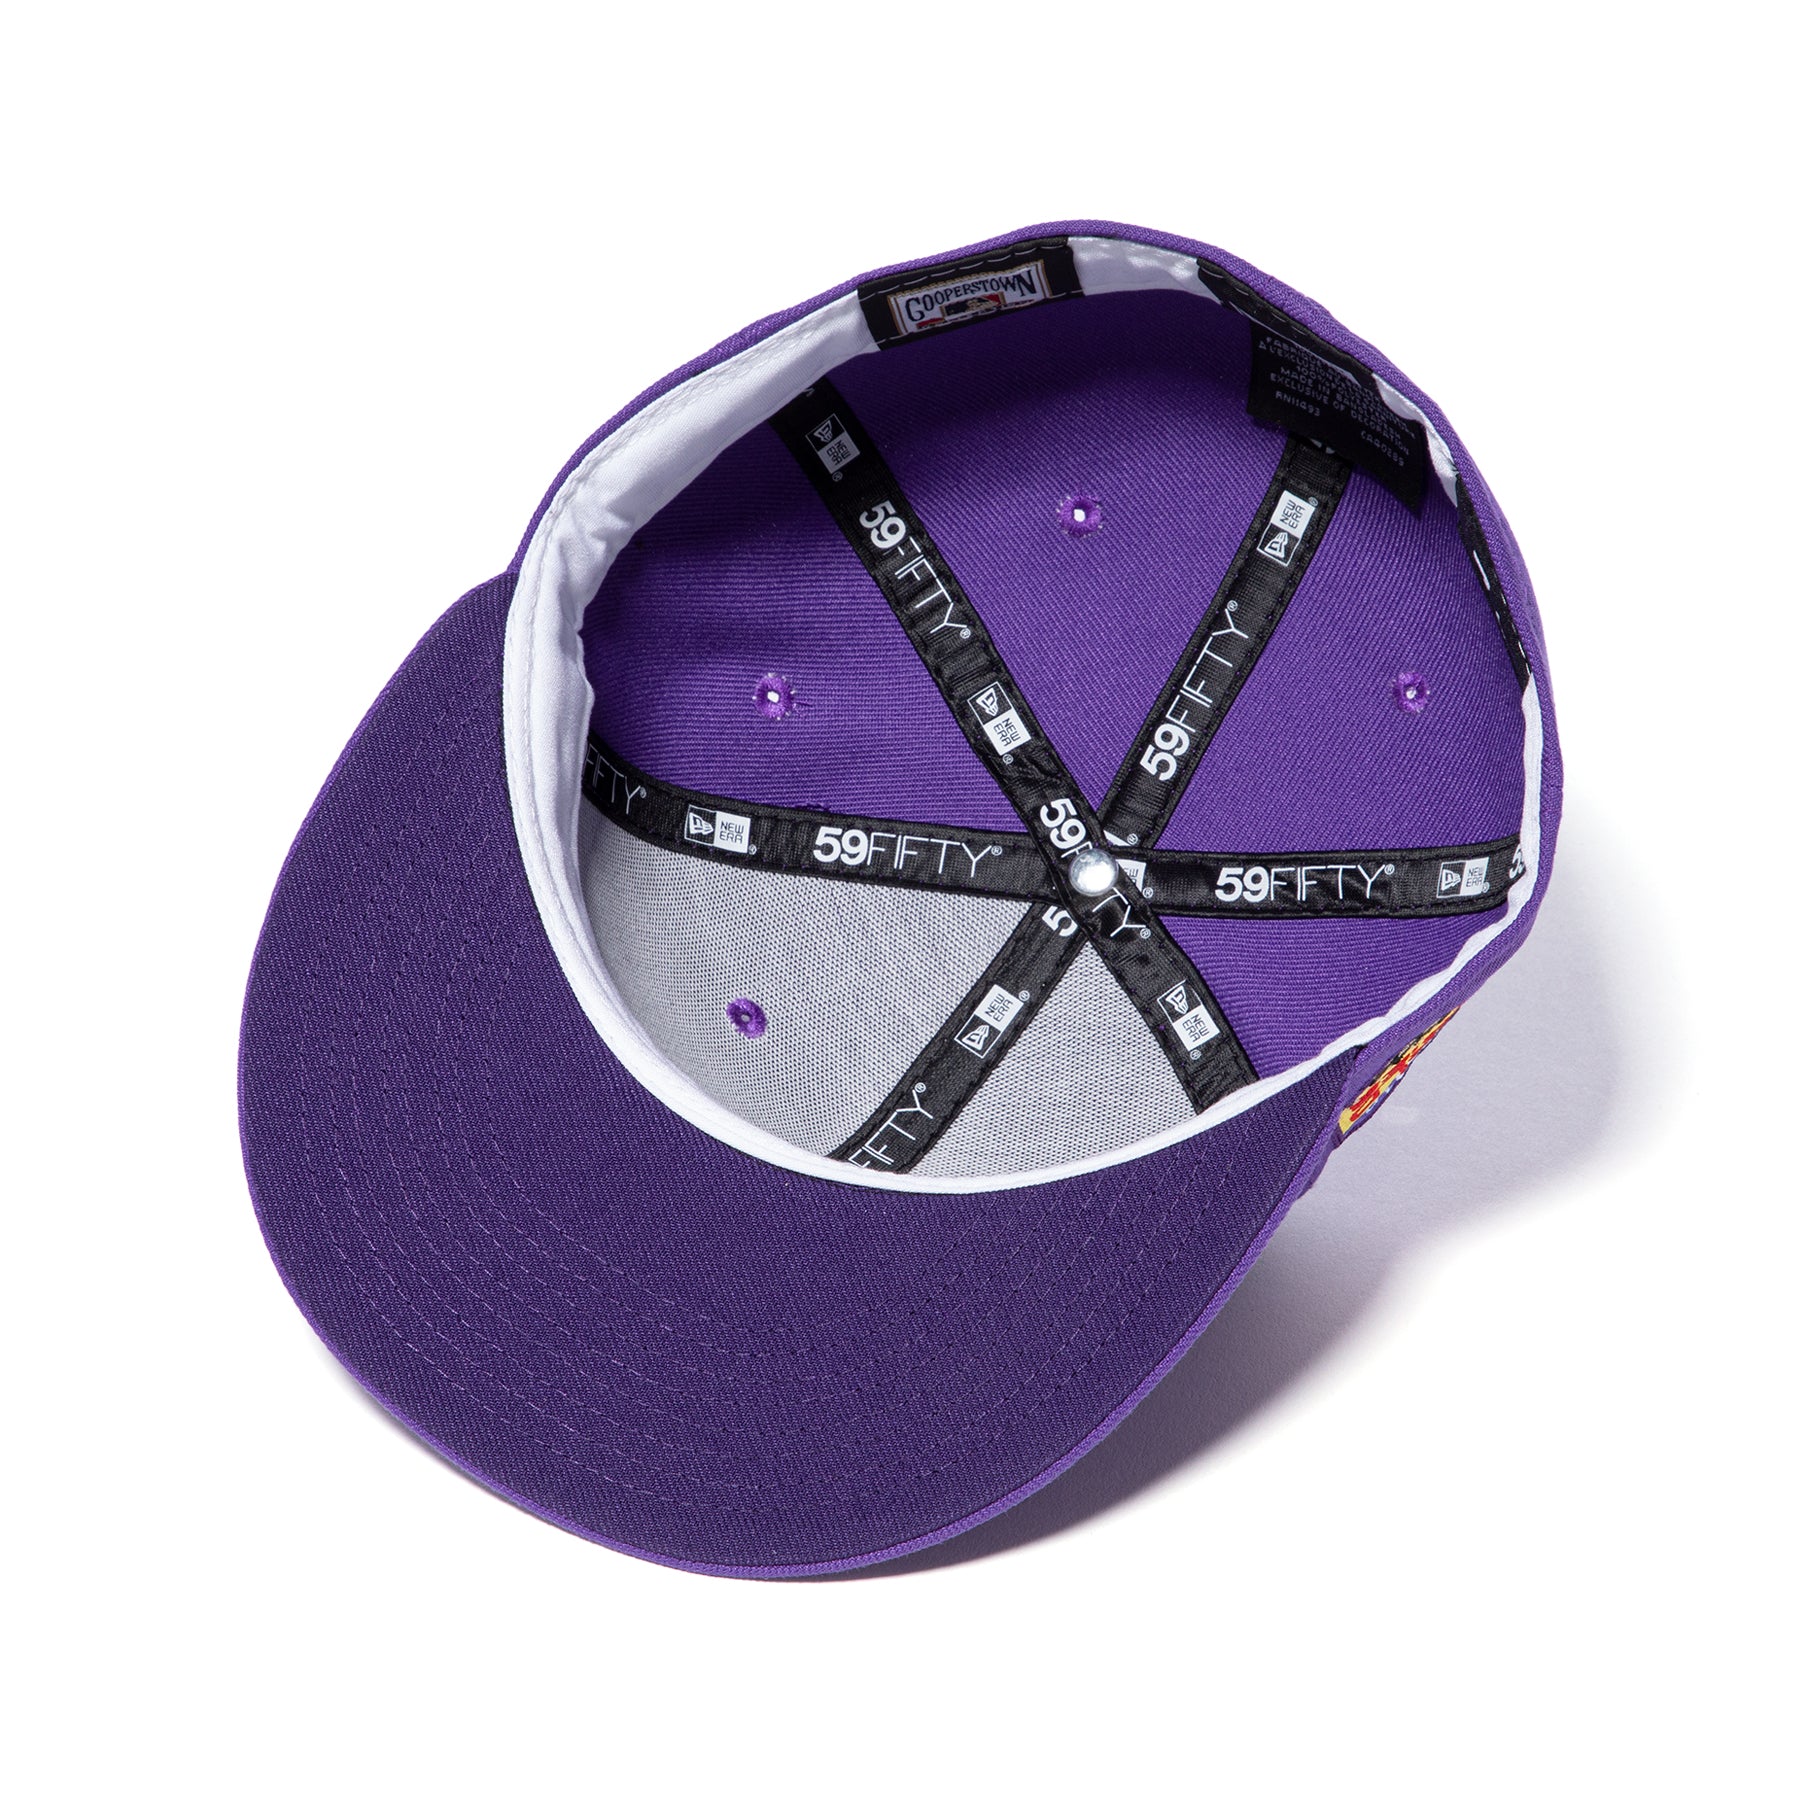 New Era Boston Red Sox 2018 World Series 59FIFTY Fitted Hat (Purple)